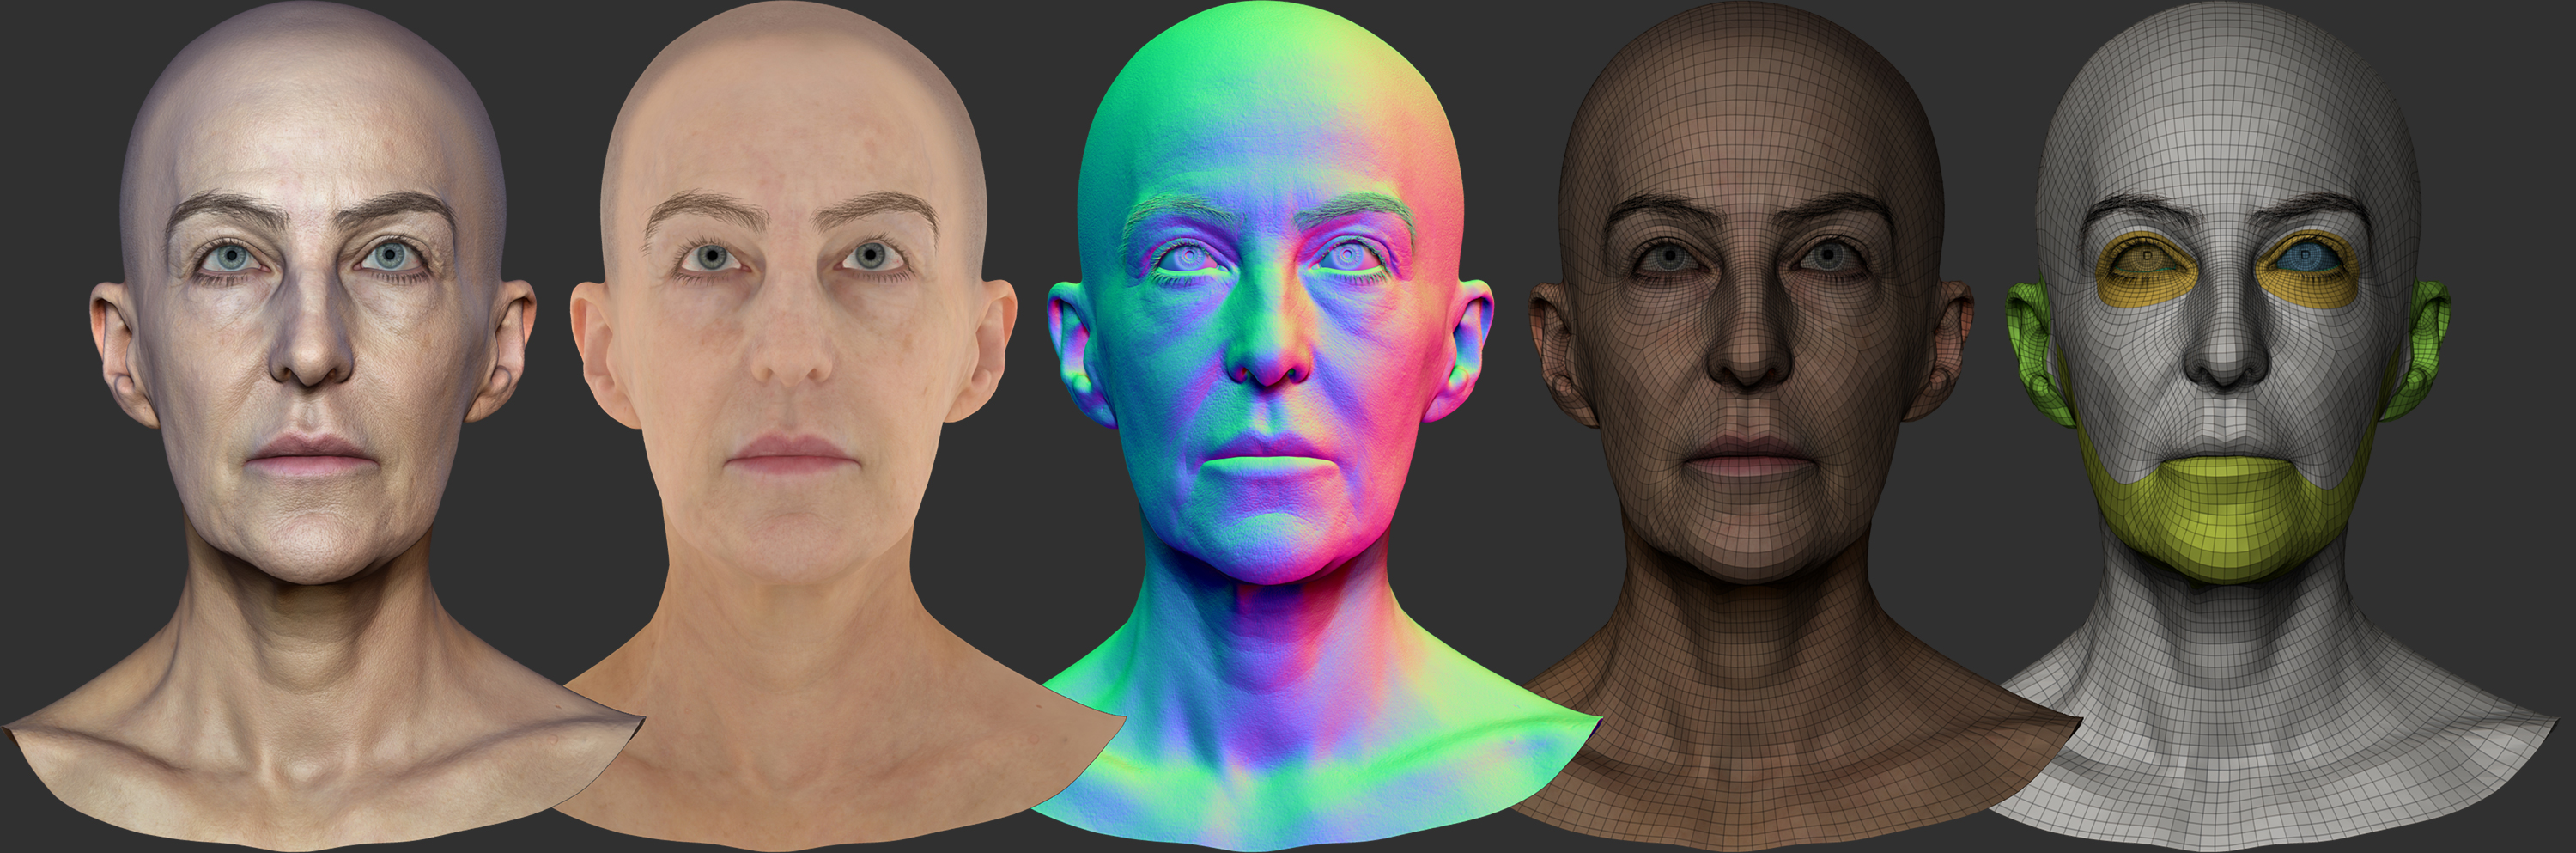 download zbrush human face texture maps 